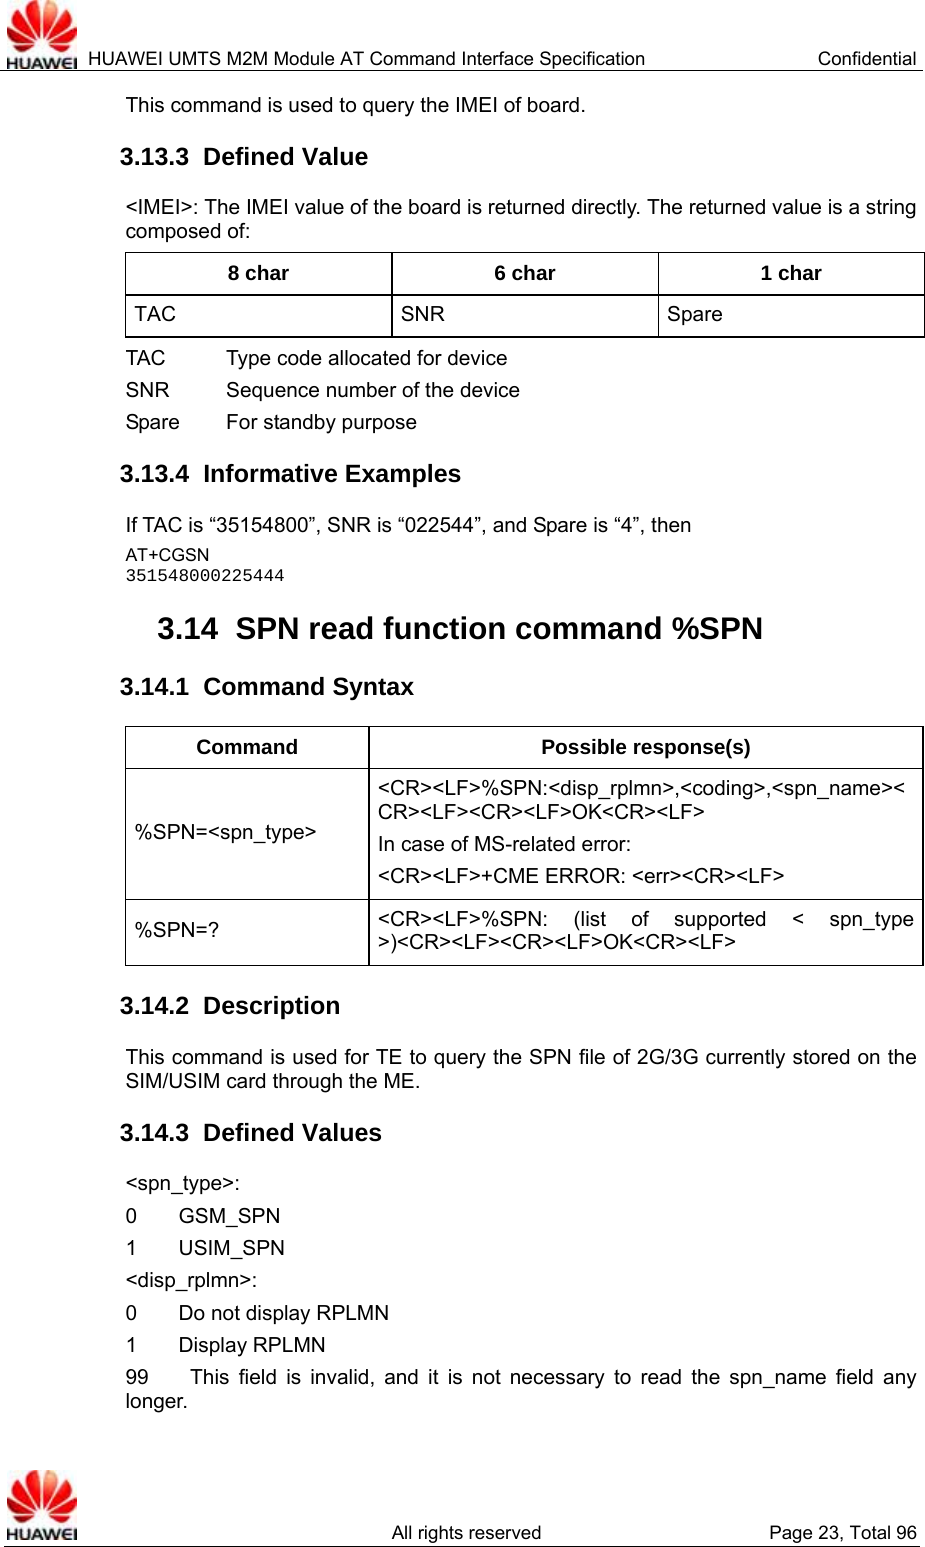  HUAWEI UMTS M2M Module AT Command Interface Specification  Confidential   All rights reserved  Page 23, Total 96 This command is used to query the IMEI of board.   3.13.3  Defined Value &lt;IMEI&gt;: The IMEI value of the board is returned directly. The returned value is a string composed of:   8 char  6 char  1 char TAC SNR Spare TAC        Type code allocated for device SNR        Sequence number of the device   Spare    For standby purpose 3.13.4  Informative Examples If TAC is “35154800”, SNR is “022544”, and Spare is “4”, then   AT+CGSN 351548000225444 3.14  SPN read function command %SPN   3.14.1  Command Syntax Command Possible response(s) %SPN=&lt;spn_type&gt; &lt;CR&gt;&lt;LF&gt;%SPN:&lt;disp_rplmn&gt;,&lt;coding&gt;,&lt;spn_name&gt;&lt;CR&gt;&lt;LF&gt;&lt;CR&gt;&lt;LF&gt;OK&lt;CR&gt;&lt;LF&gt; In case of MS-related error:   &lt;CR&gt;&lt;LF&gt;+CME ERROR: &lt;err&gt;&lt;CR&gt;&lt;LF&gt; %SPN=?  &lt;CR&gt;&lt;LF&gt;%SPN: (list of supported &lt; spn_type &gt;)&lt;CR&gt;&lt;LF&gt;&lt;CR&gt;&lt;LF&gt;OK&lt;CR&gt;&lt;LF&gt; 3.14.2  Description This command is used for TE to query the SPN file of 2G/3G currently stored on the SIM/USIM card through the ME.   3.14.3  Defined Values &lt;spn_type&gt;: 0    GSM_SPN 1    USIM_SPN &lt;disp_rplmn&gt;:  0    Do not display RPLMN  1    Display RPLMN  99    This field is invalid, and it is not necessary to read the spn_name field any longer.  